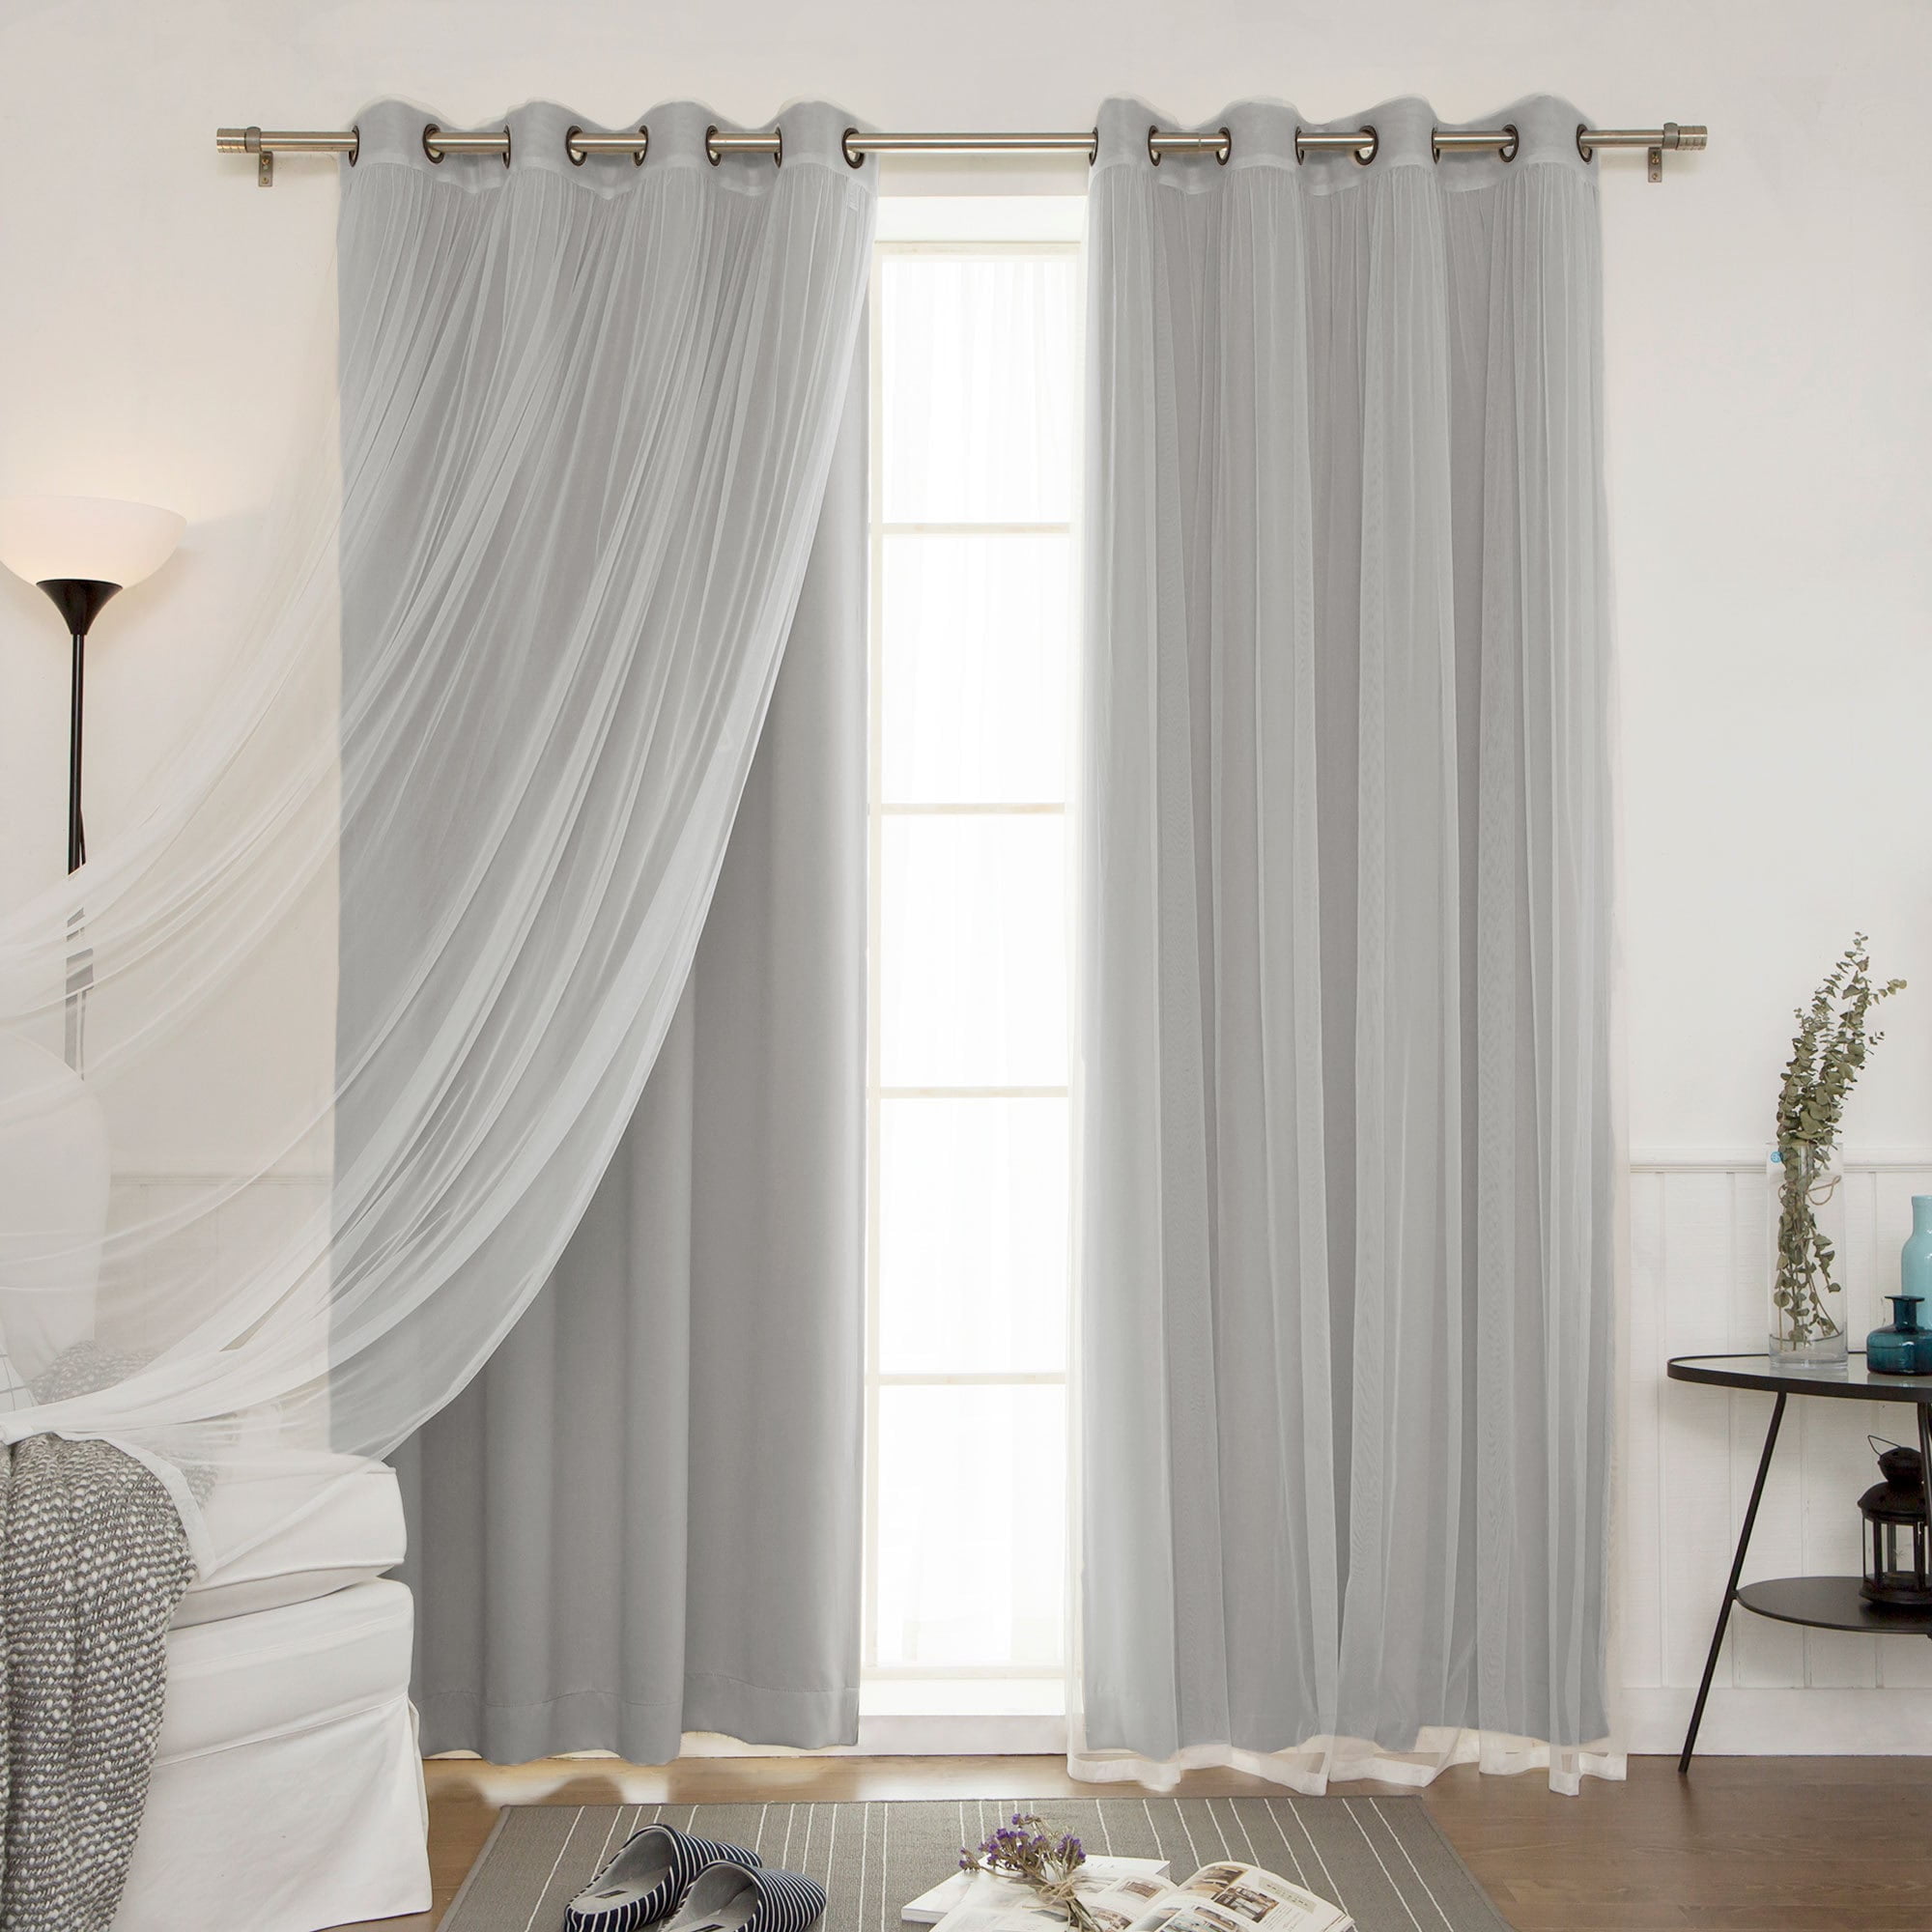 Blackout Curtain Window Summer Shading Screen Cloth Home Bedroom Curtain Set 